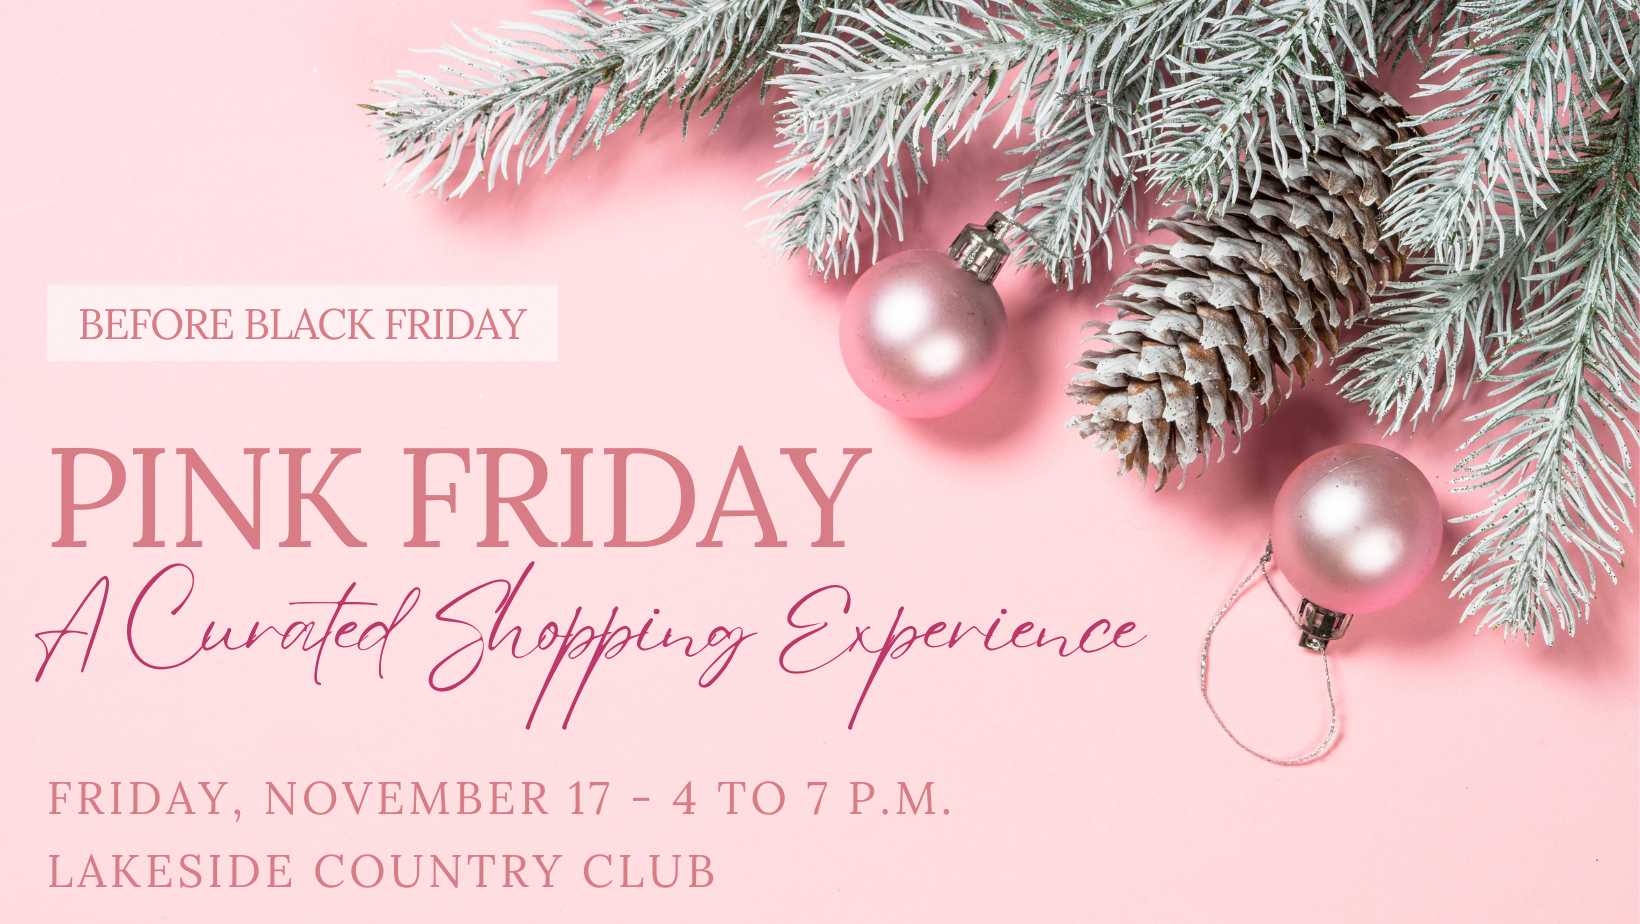 Pink Friday... A Curated Shopping Experience!